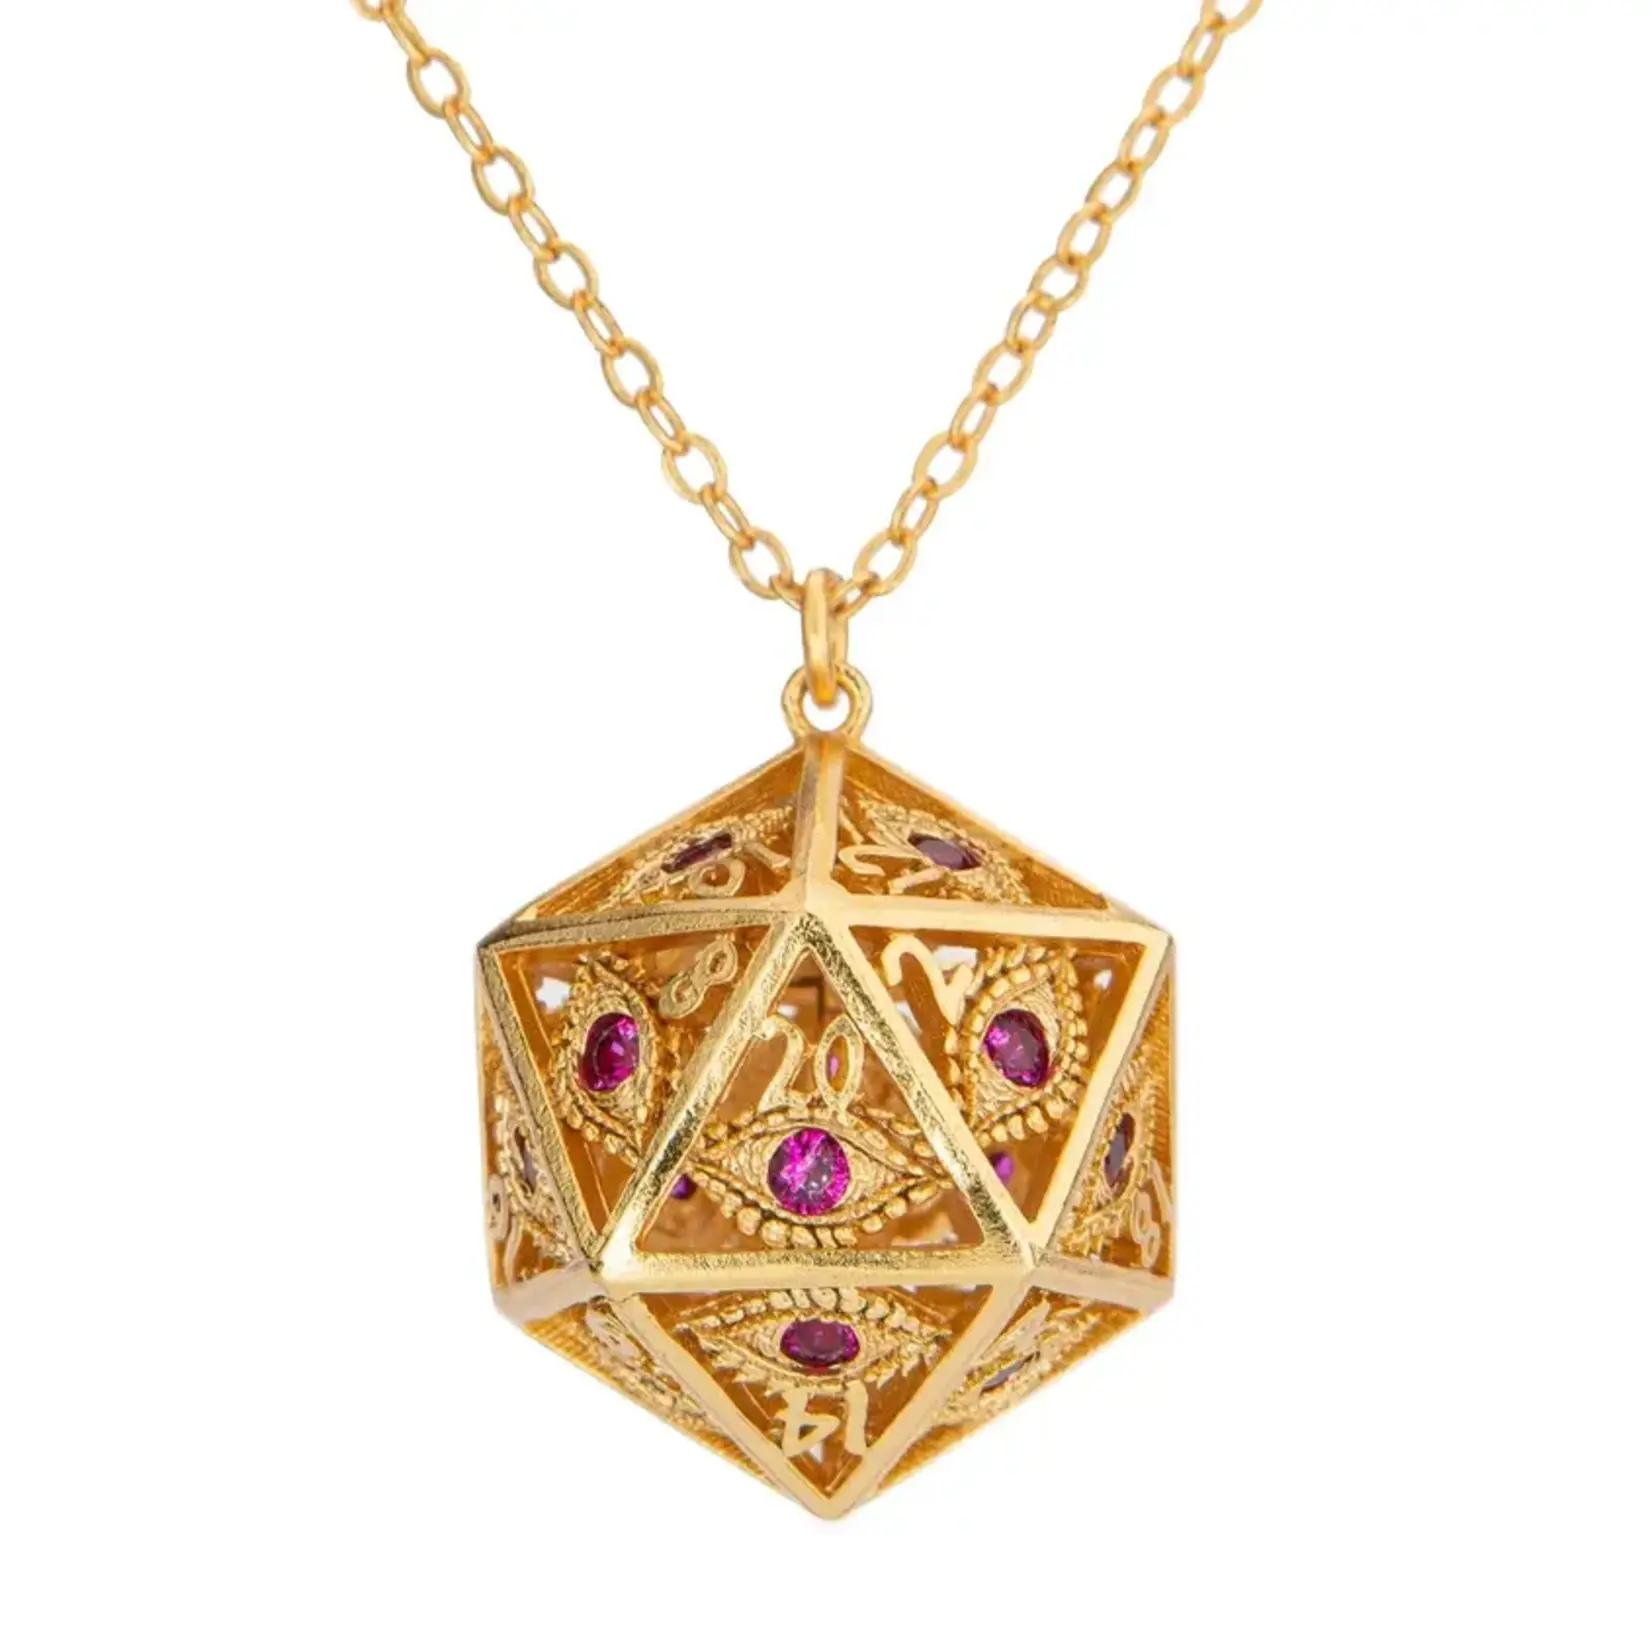 ⚶ Archmage D20 ⚶ D20 necklace, rpg necklace · Mythic Hydra · Online Store  Powered by Storenvy